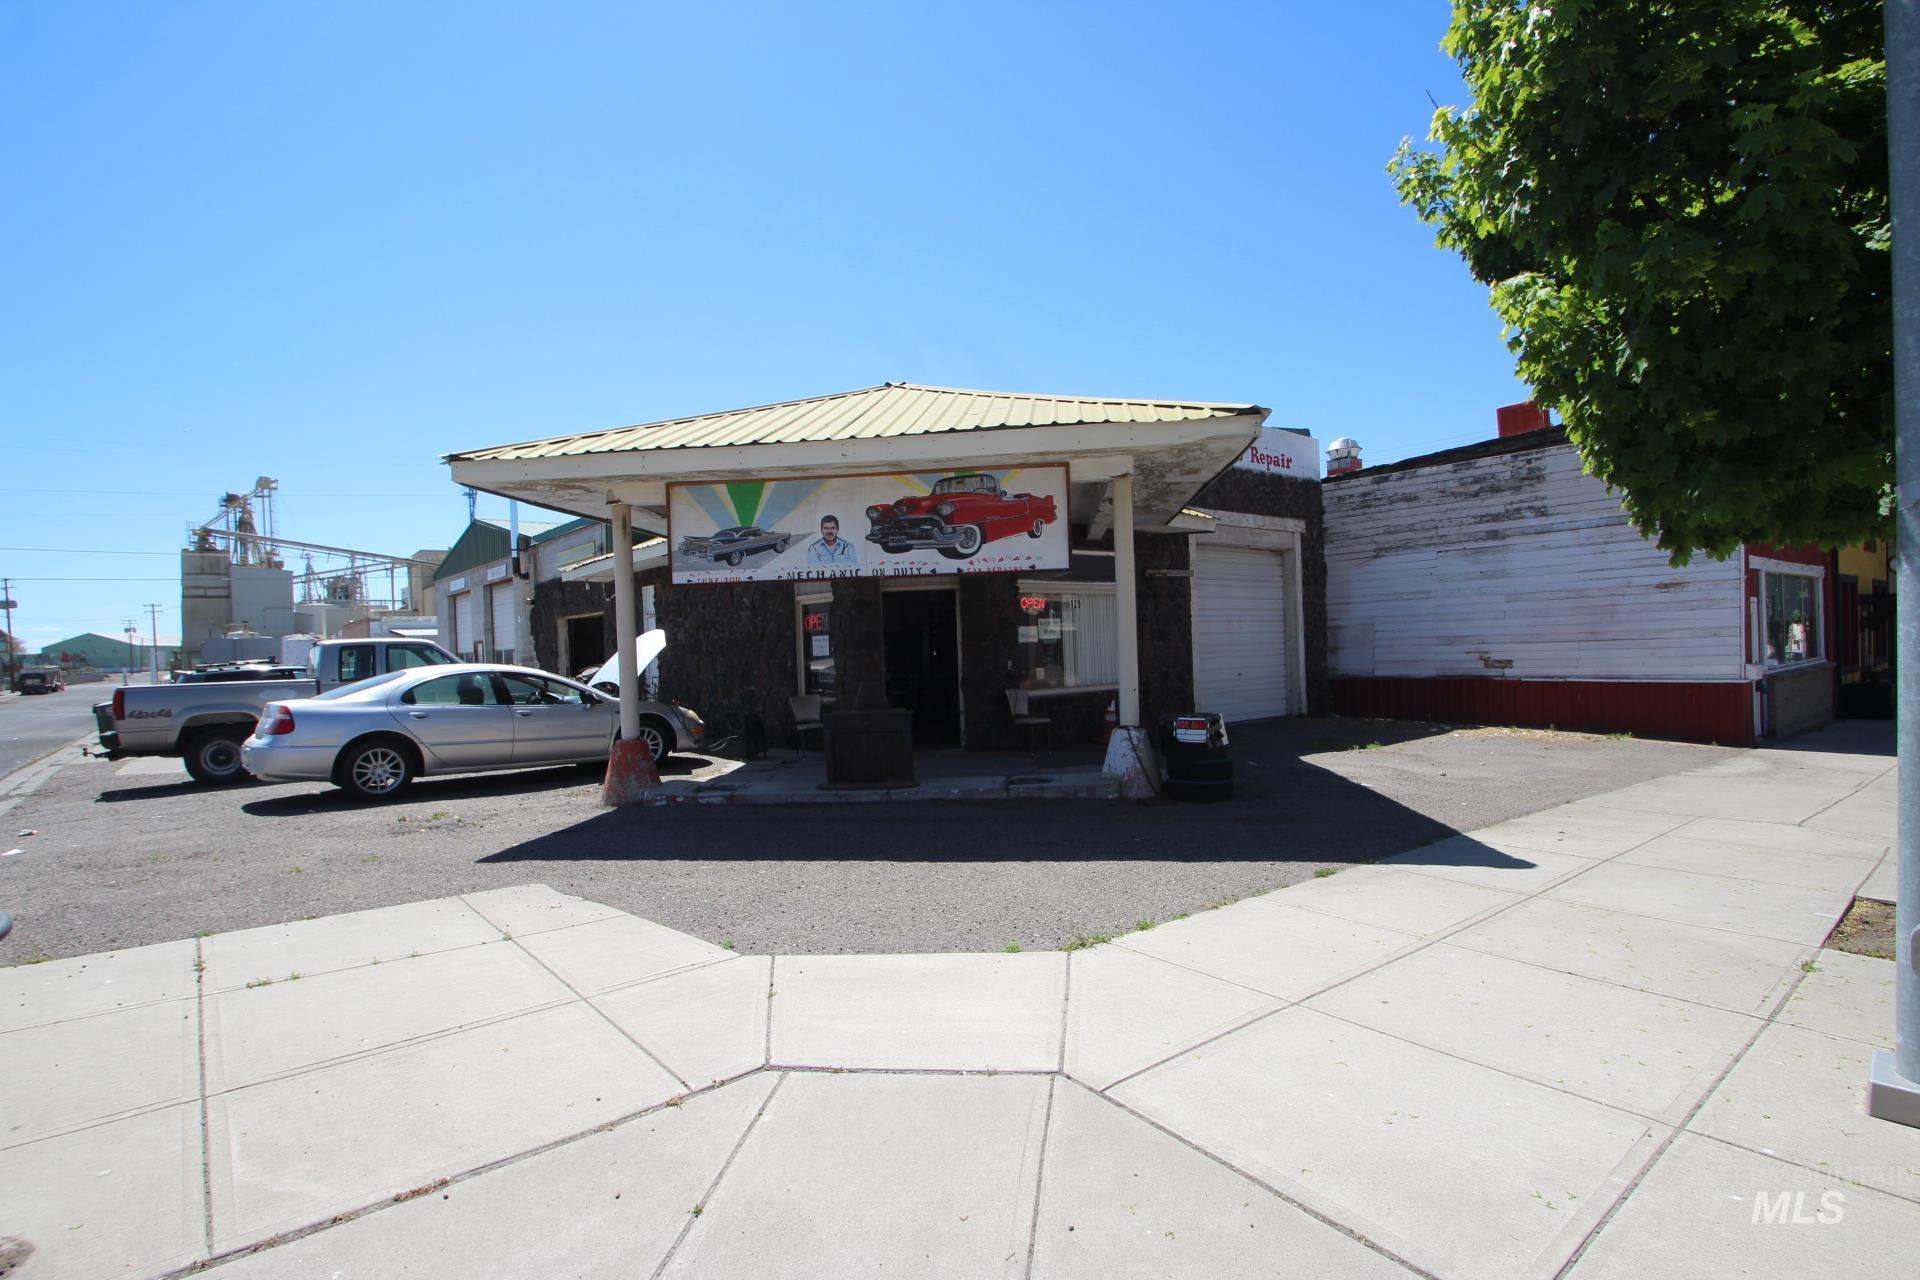 129 S Broadway, Buhl, Idaho 83316, Business/Commercial For Sale, Price $212,500,MLS 98883746